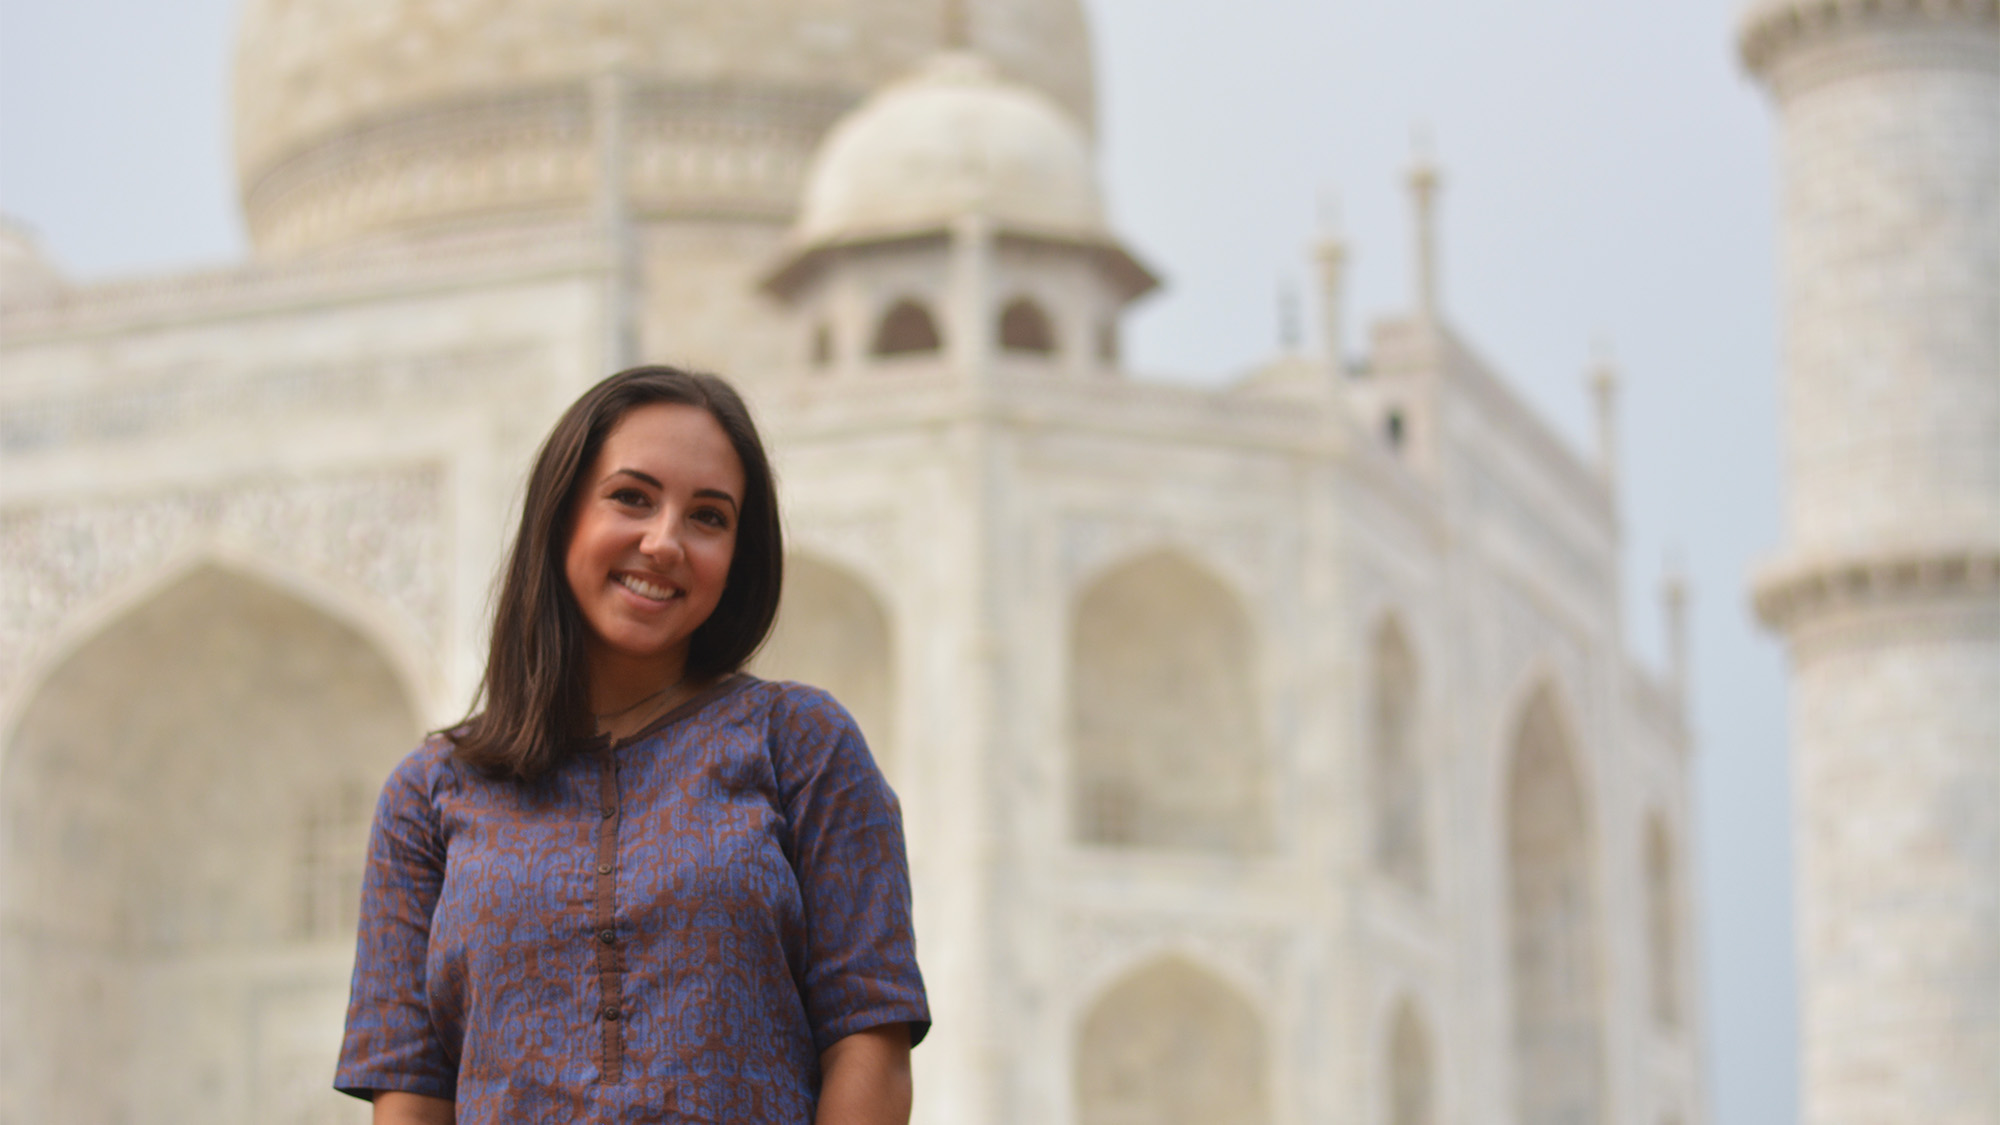 Amanda Wibben stands with a temple in India in the background